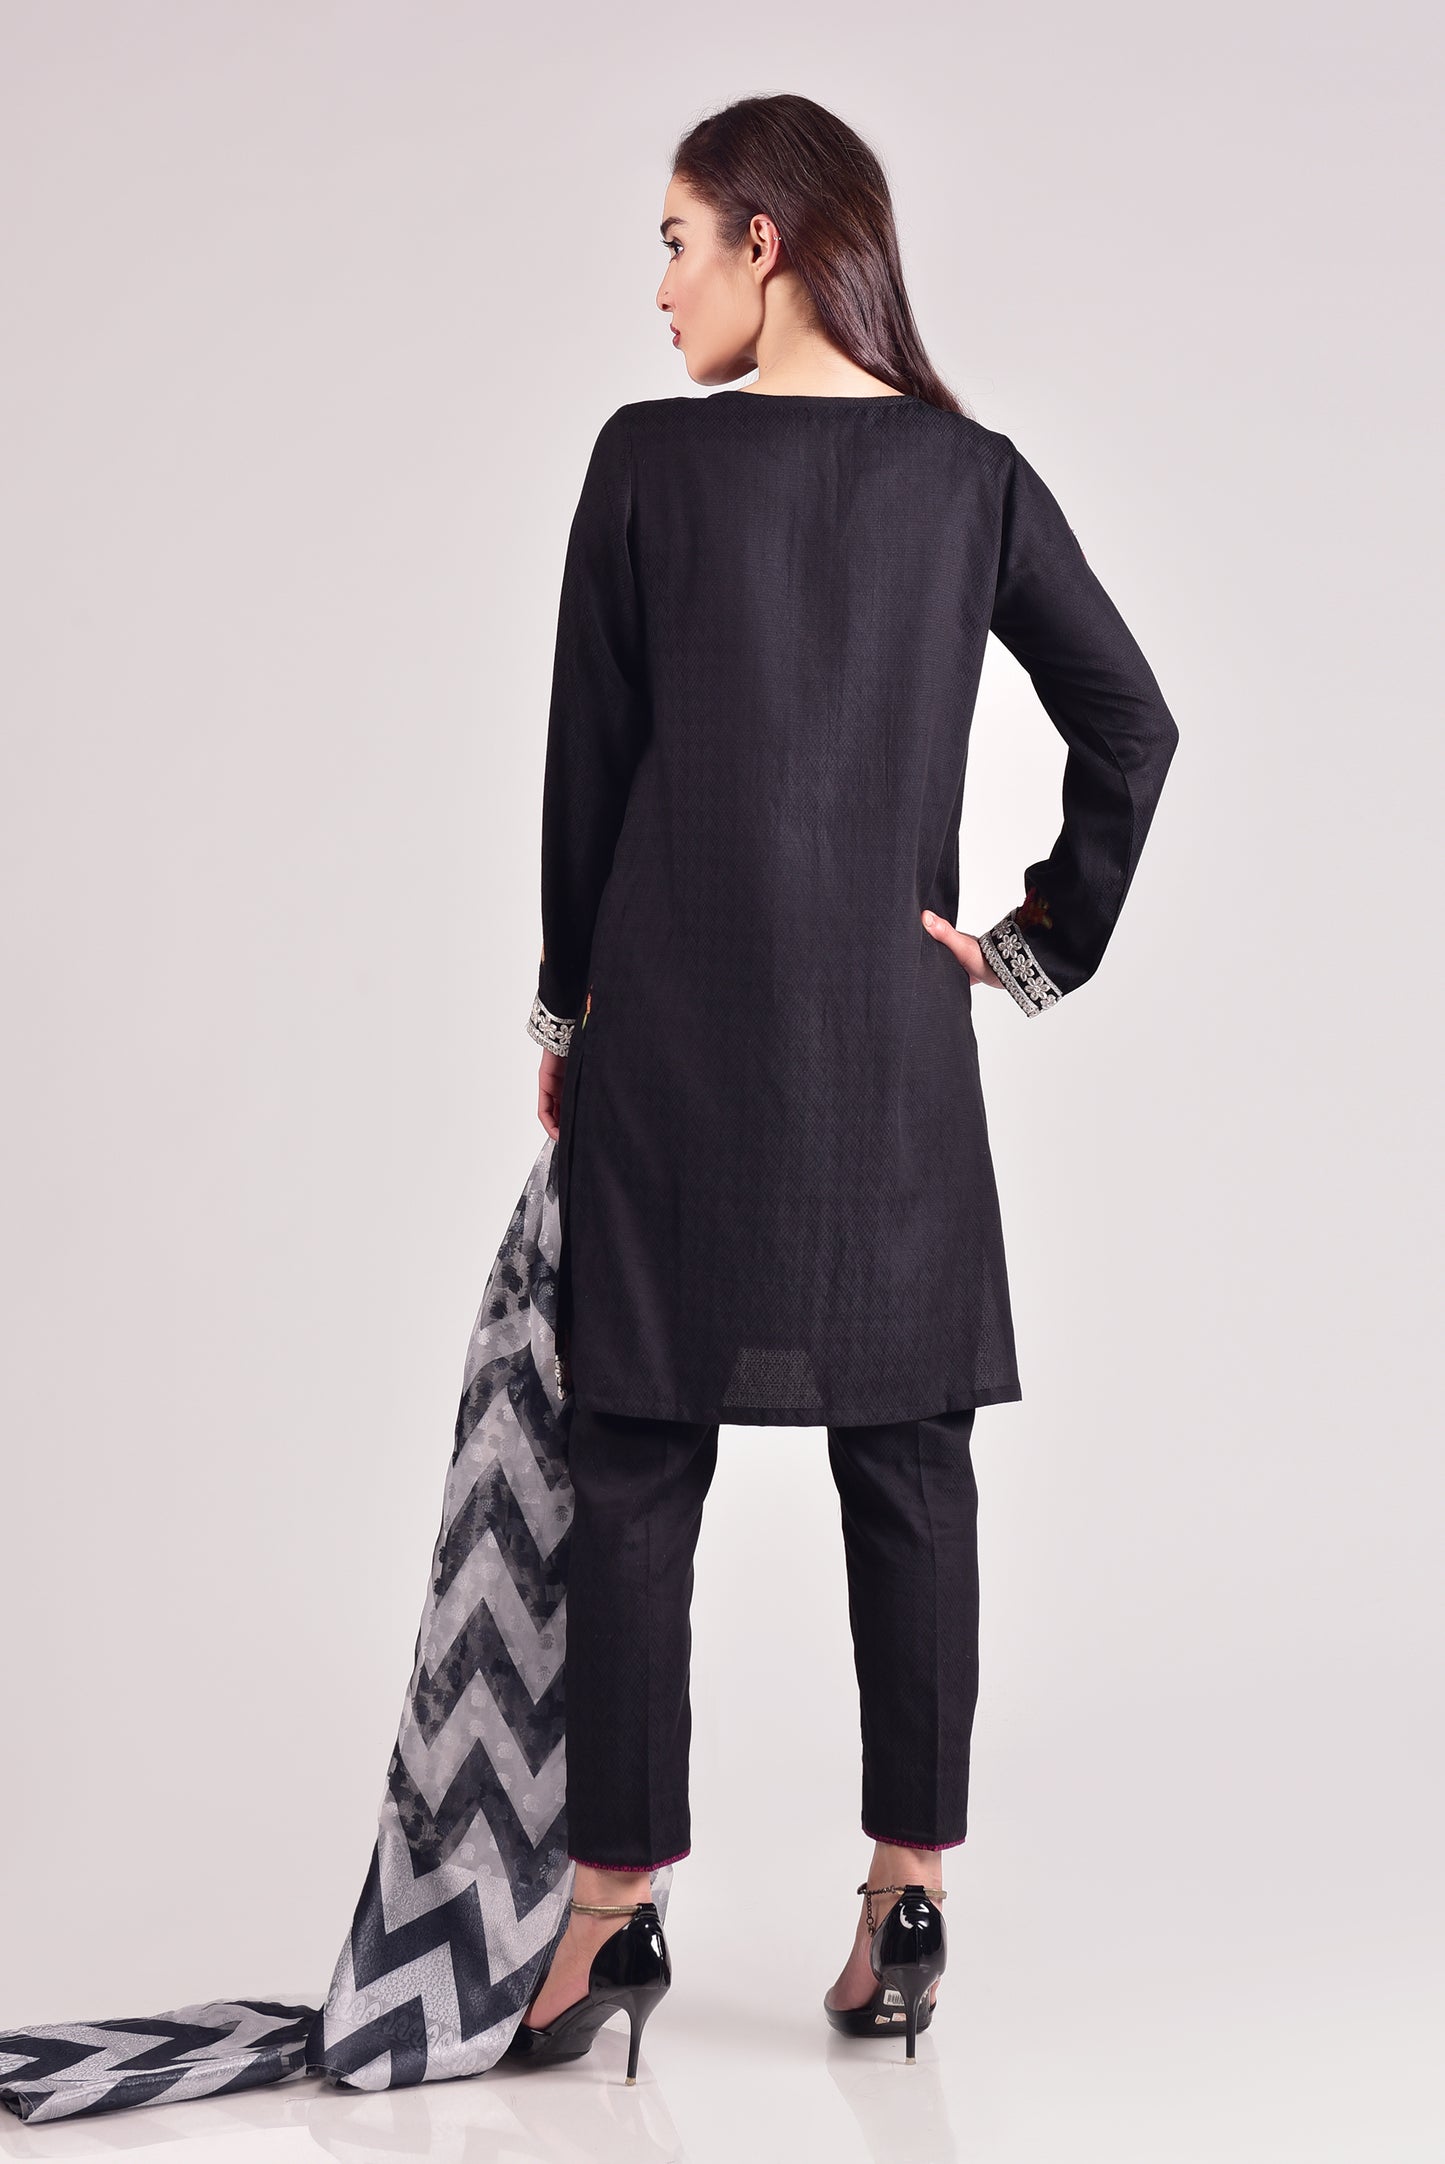 EMBROIDERED VISCOSE COTTON 3 PIECE STITCHED SUIT - Mosaic